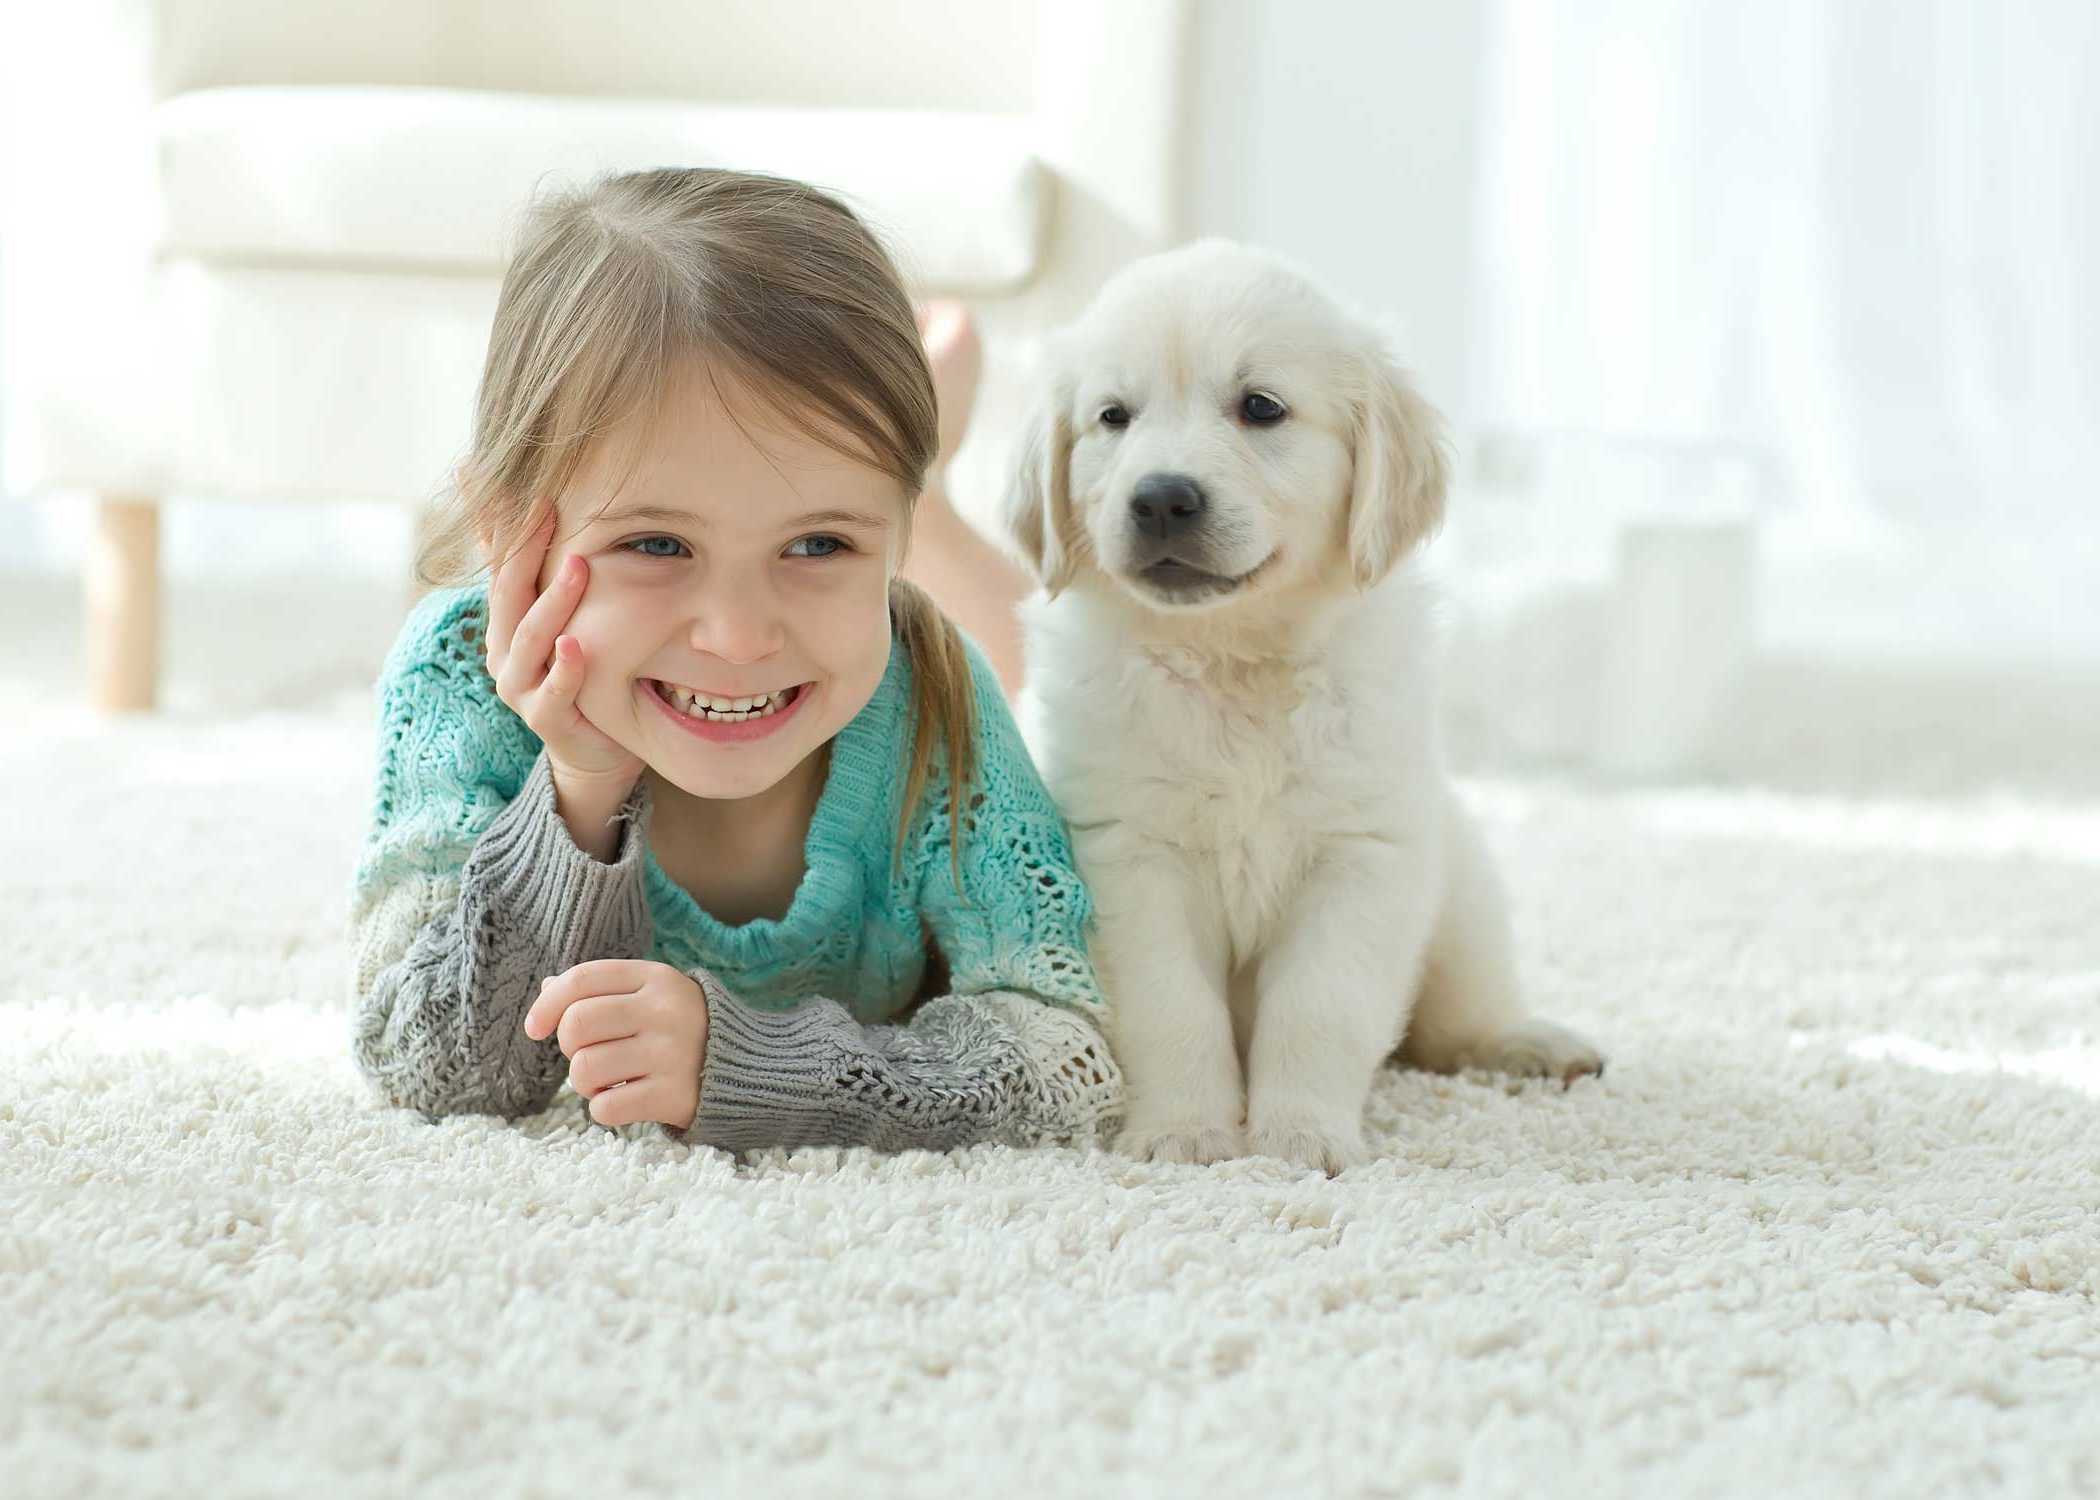 little girl laying next to puppy on white carpeted floor